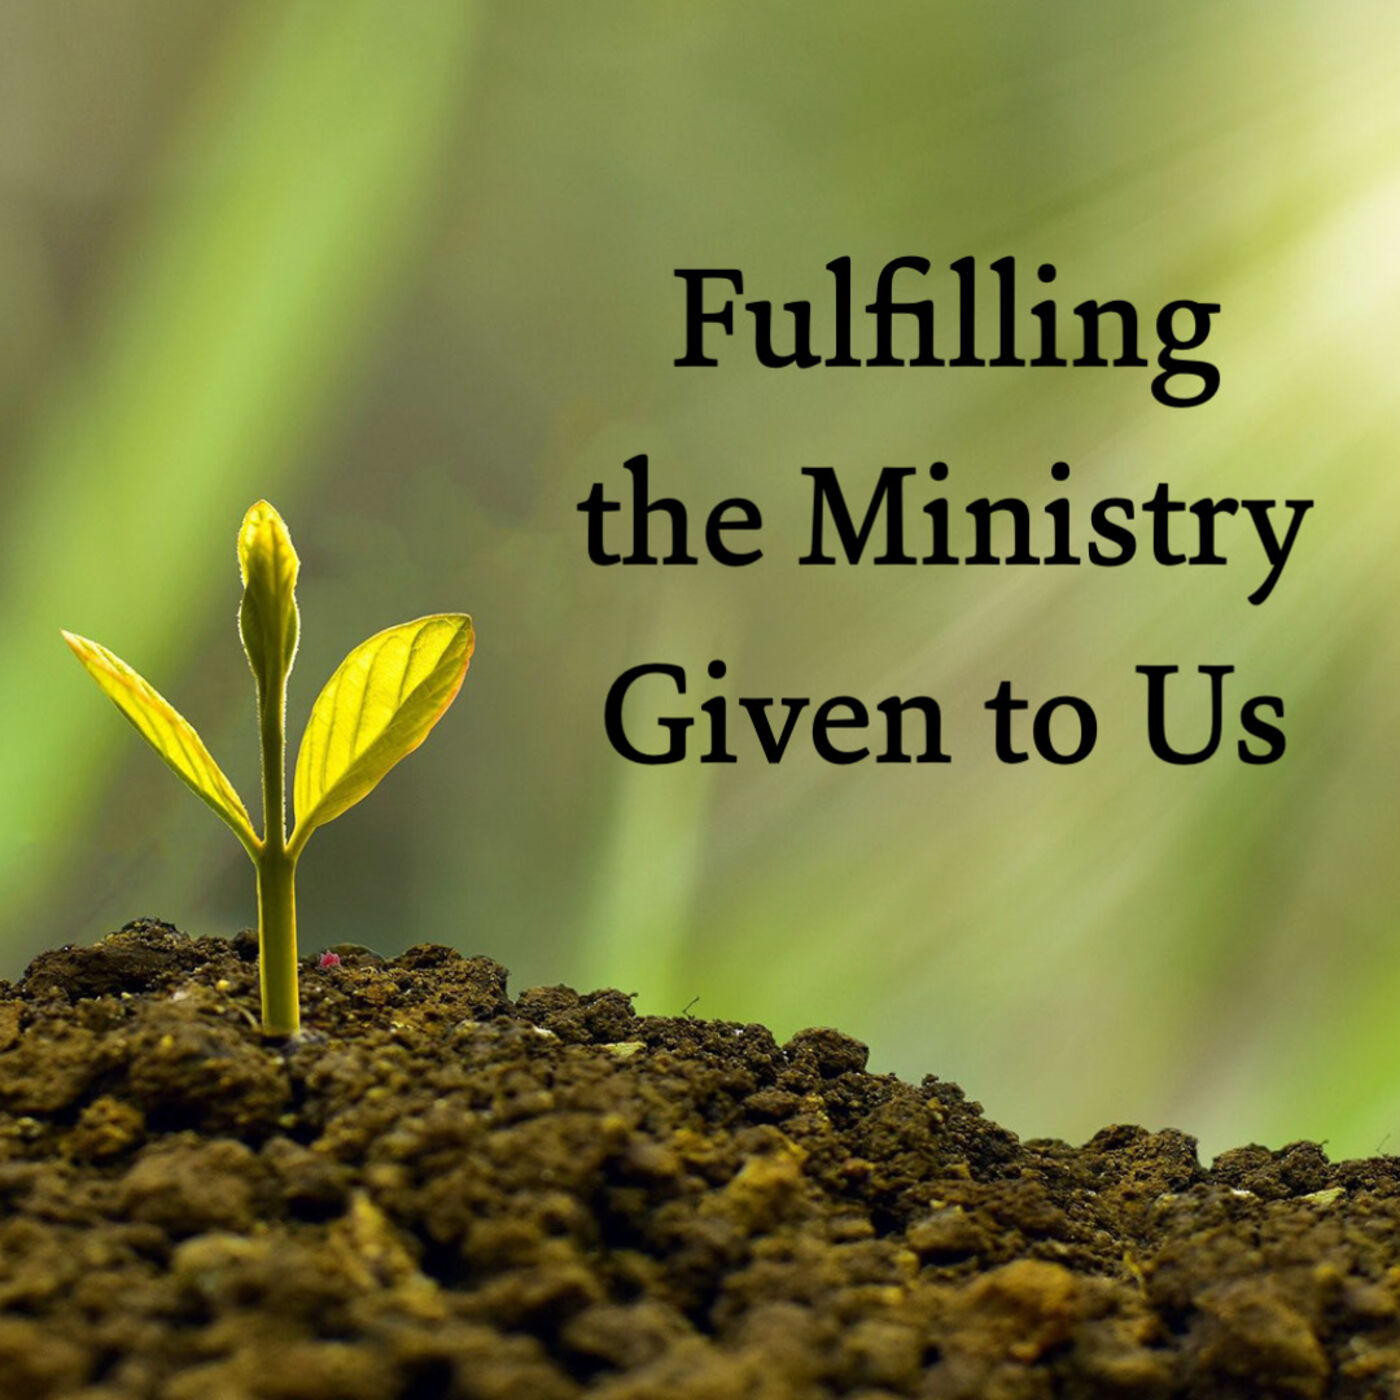 Fulfilling the Ministry Given to Us